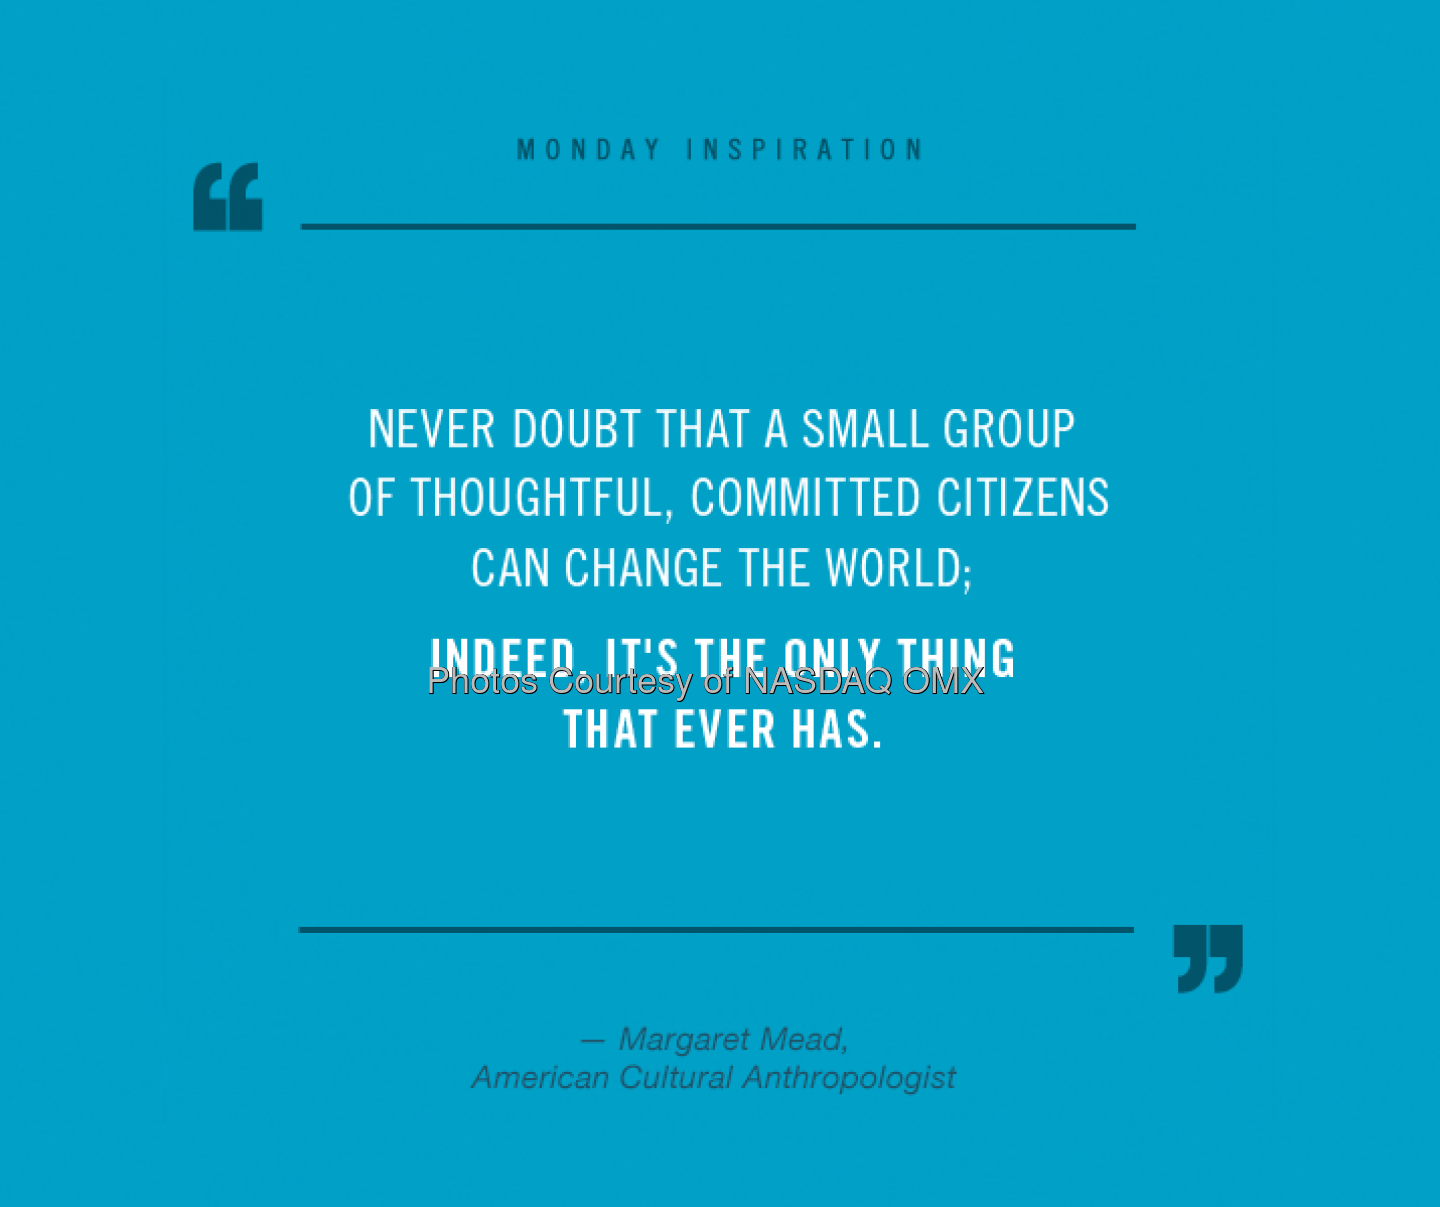 Insightful #MondayInspiration from anthropologist Margaret Mead. A great reminder everyone can create change.  Source: http://facebook.com/NASDAQ